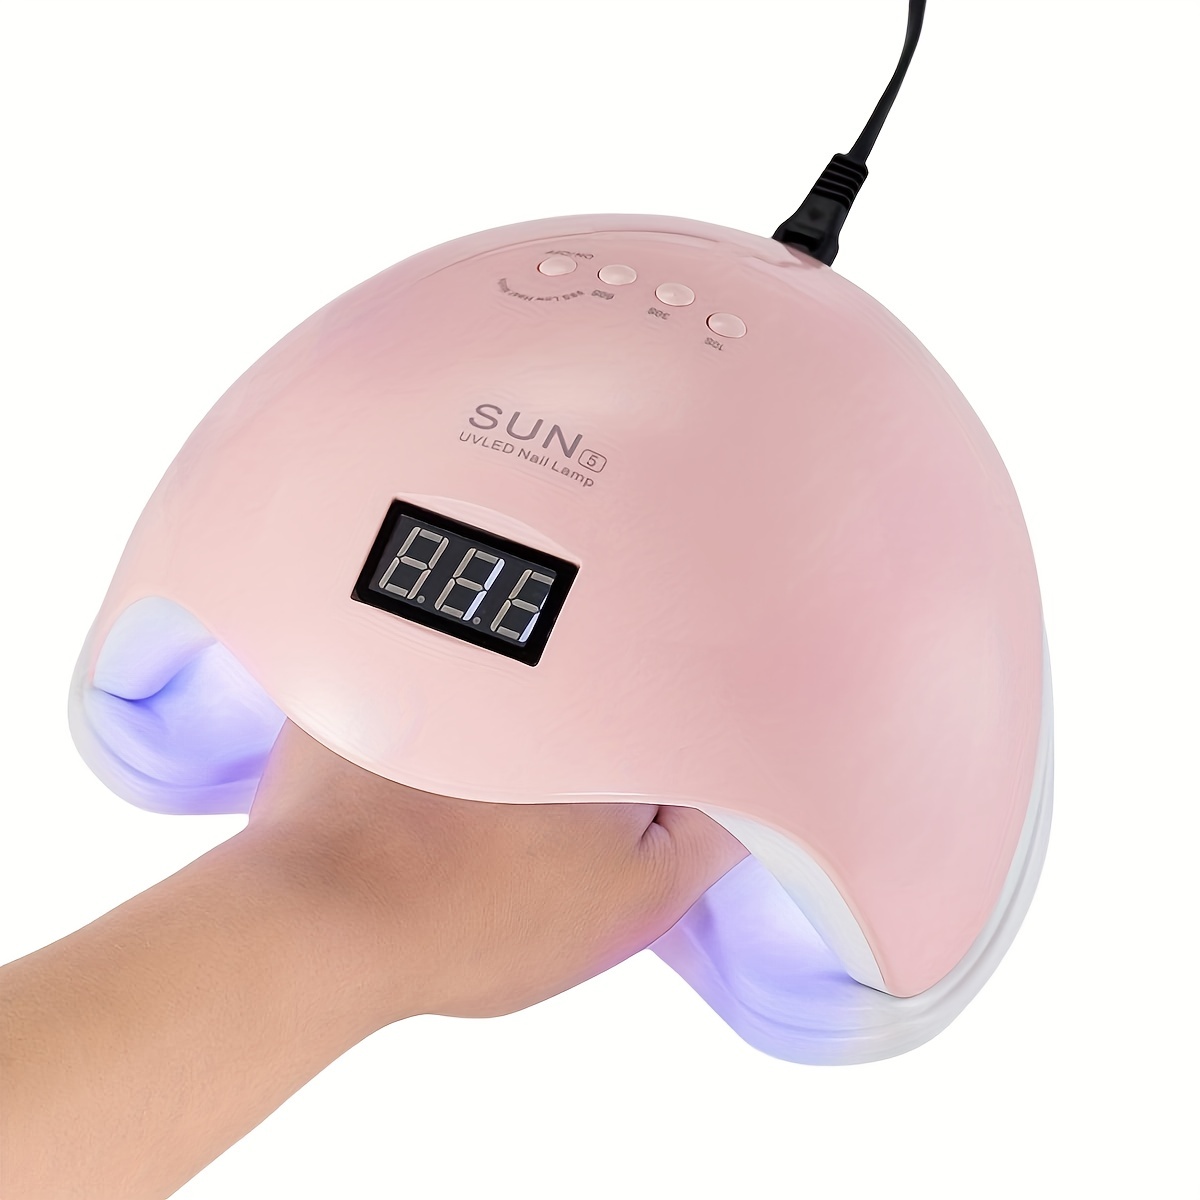 UV LED Nail Lamp 120W Faster Gel Nail Dryer Professional Curing Lamp for  Fingernail and Toenail Nail Gel Polish Machine with 4 Timer Setting Touch  Screen (Sun BQ5T) (Pink)